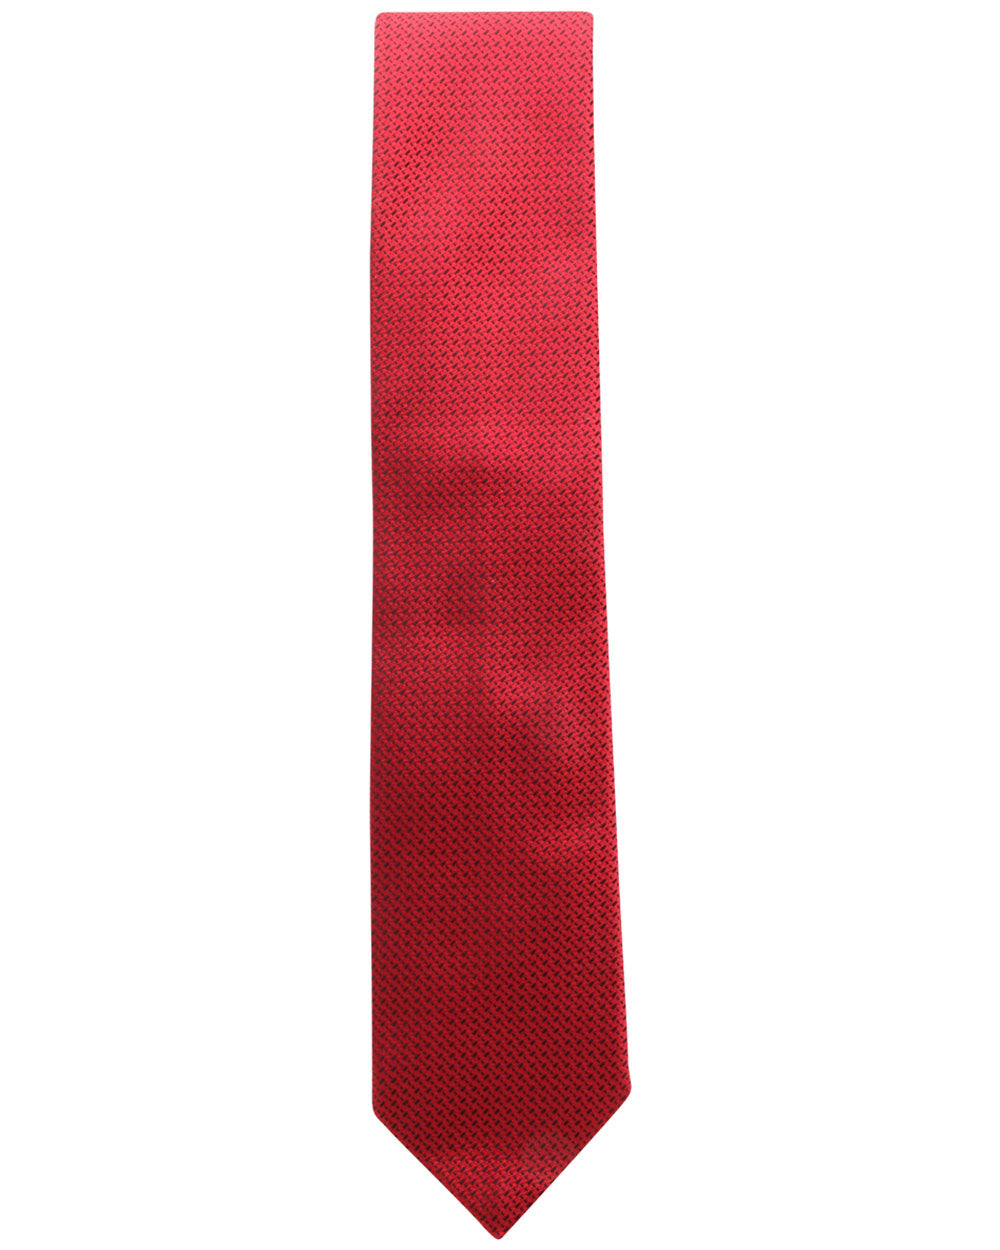 Red and Black Micro Patterned Tie